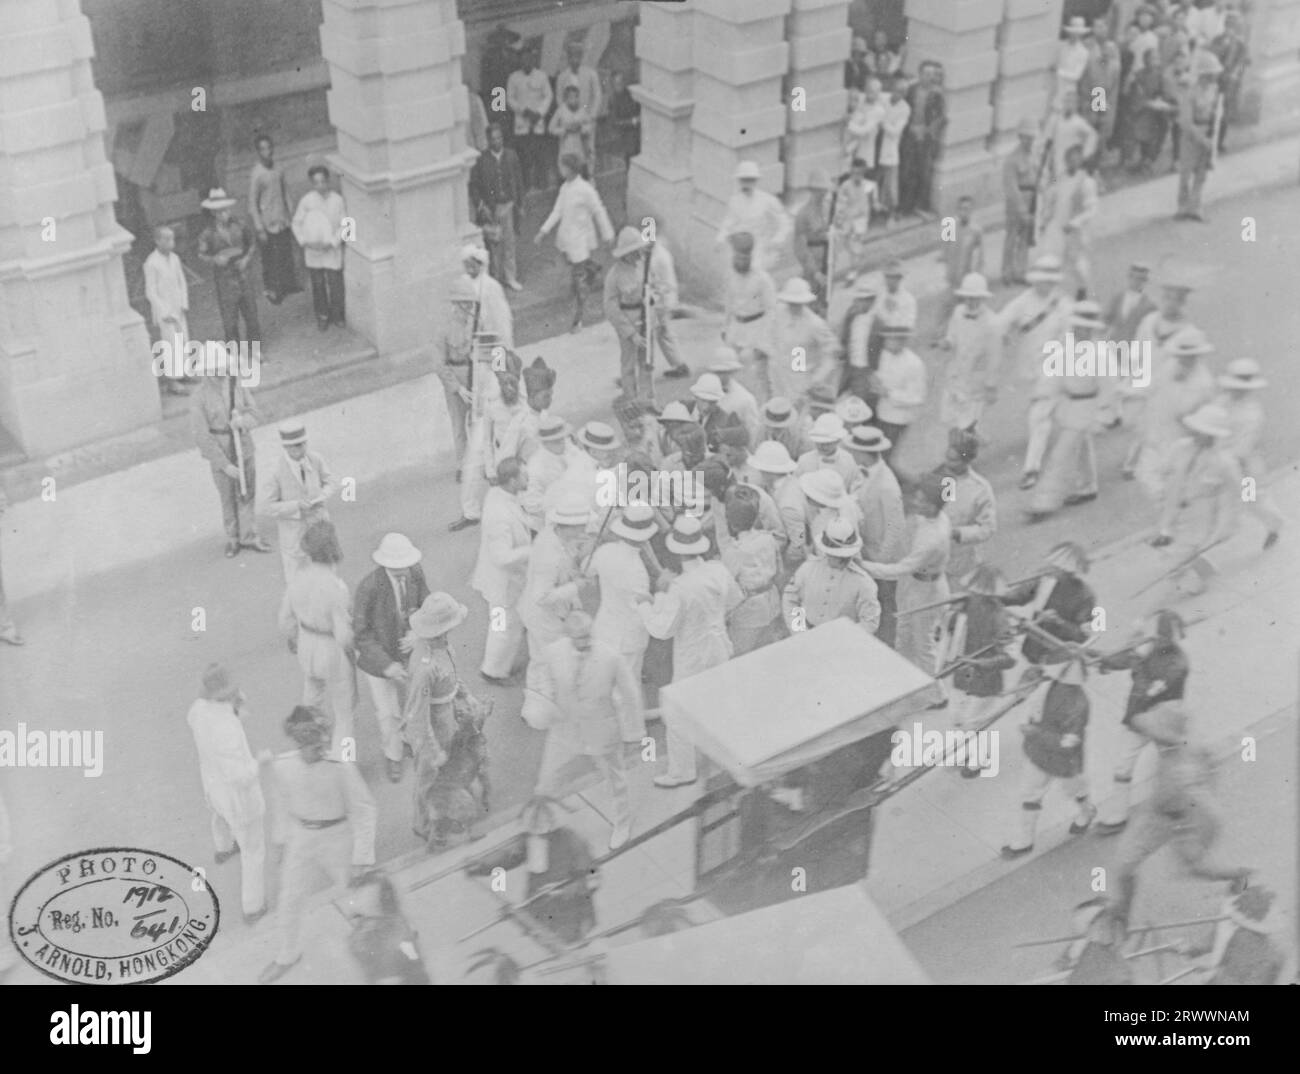 Assassination attempt upon the life of the Govenor of Hong Kong, July 1912. This photograph is the first of two photos taken in sequence just after the attempt.  Original manuscript caption: Hong Kong ?1910 Pedder Street- attempted assassination of H.G. Sa. 7. May. Governor of Hong Kong. Just after event. Stock Photo